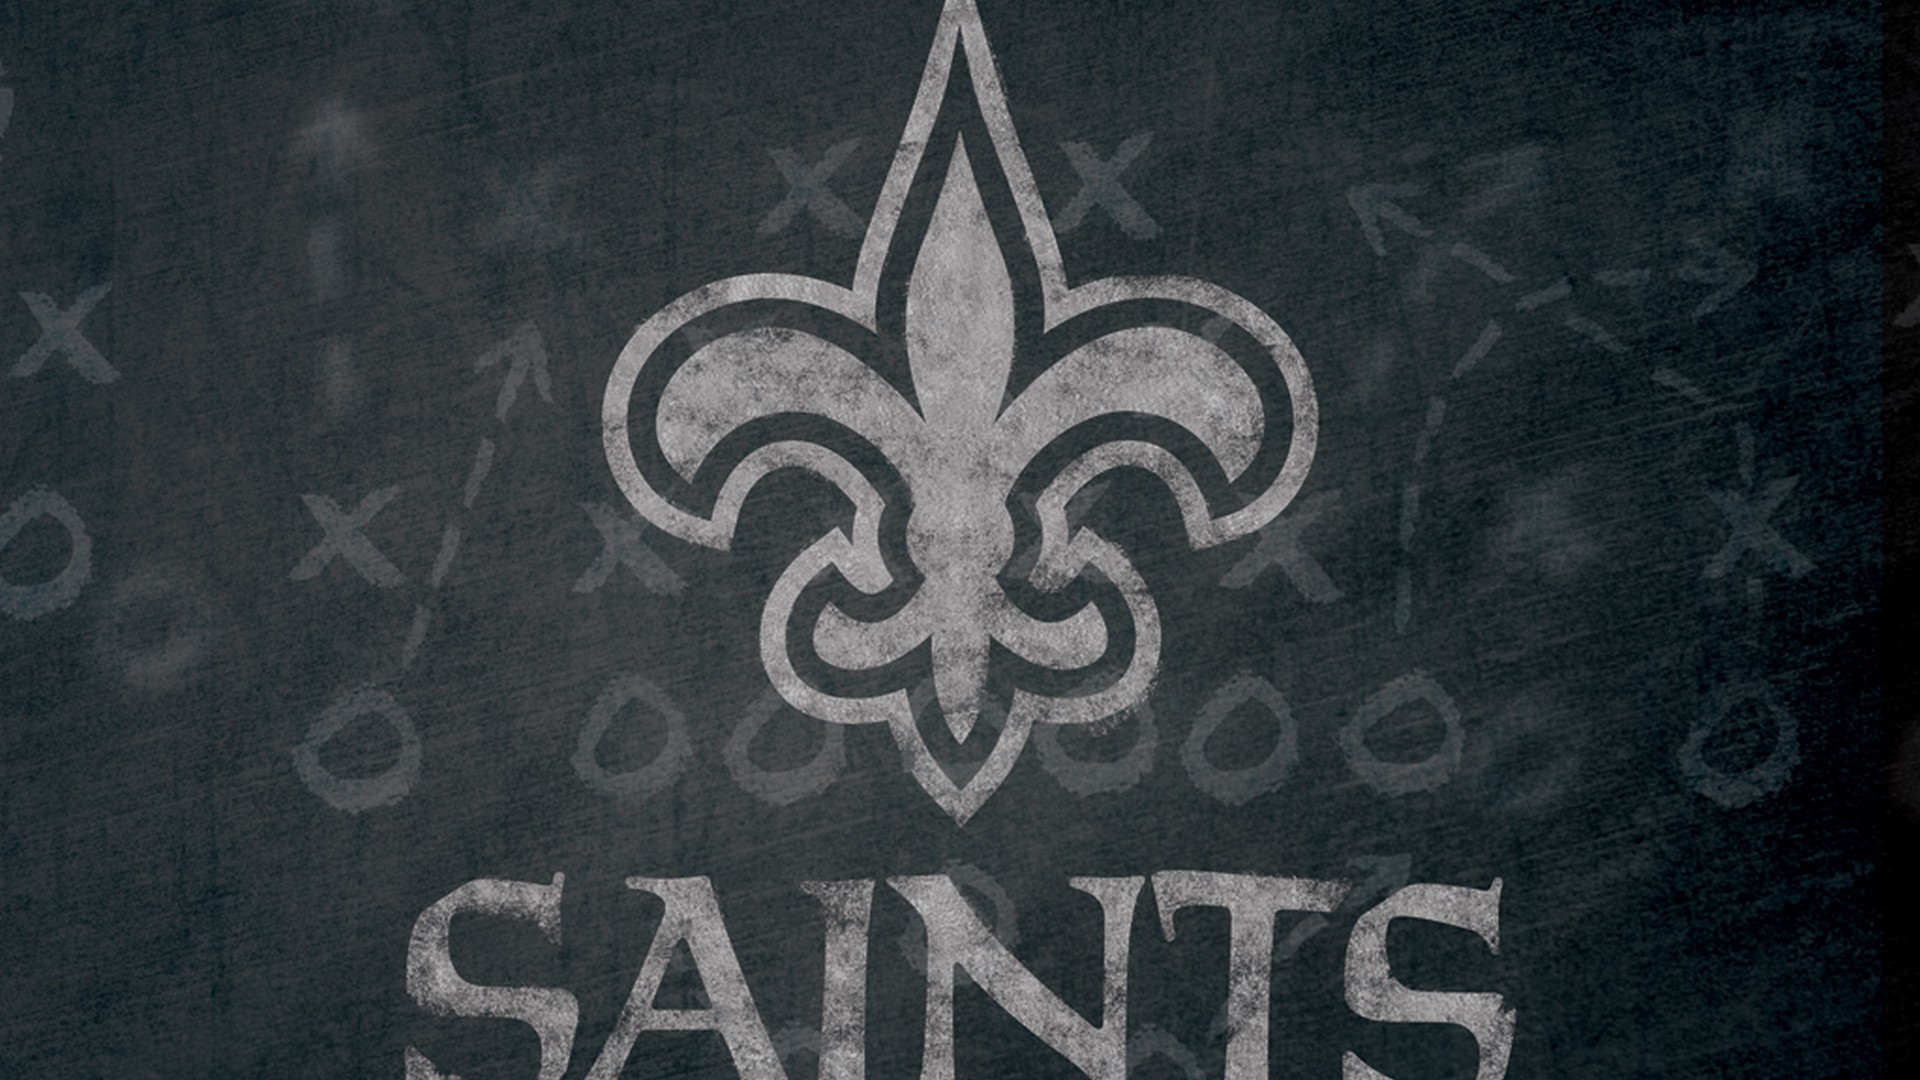 Windows Wallpaper New Orleans Saints NFL With Resolution 1920X1080 pixel. You can make this wallpaper for your Mac or Windows Desktop Background, iPhone, Android or Tablet and another Smartphone device for free